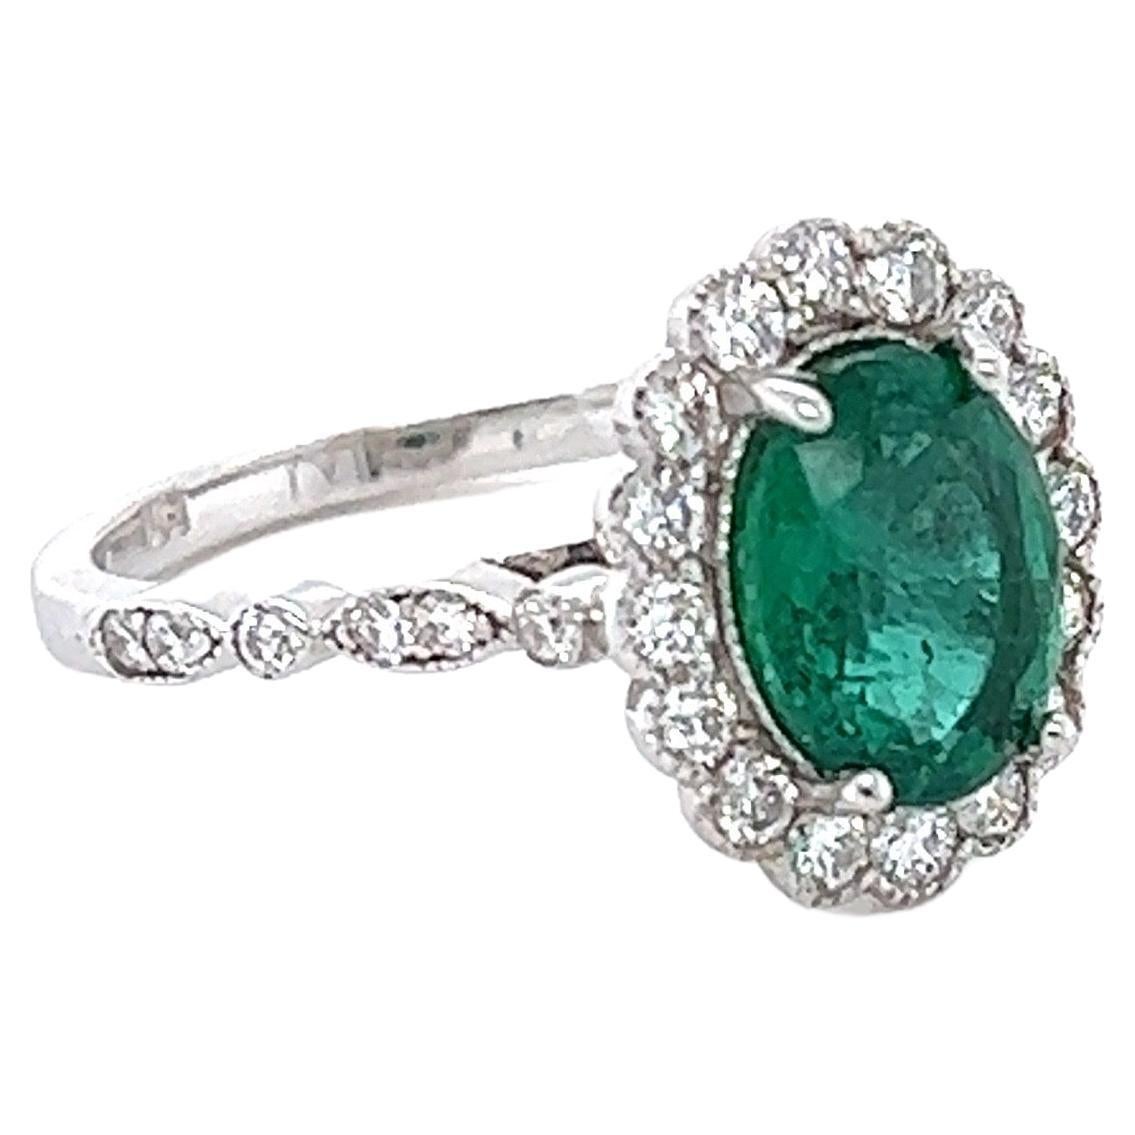 This ring has a 1.68 Carat Oval Cut Emerald and is surrounded by 28 Round Cut Diamonds that weighs 0.54 Carats. (Clarity: SI1, Color: F) The total carat weight of the ring is 2.22 carats. 
The Oval Cut Emerald measures at approximately 9 mm x 7 mm.